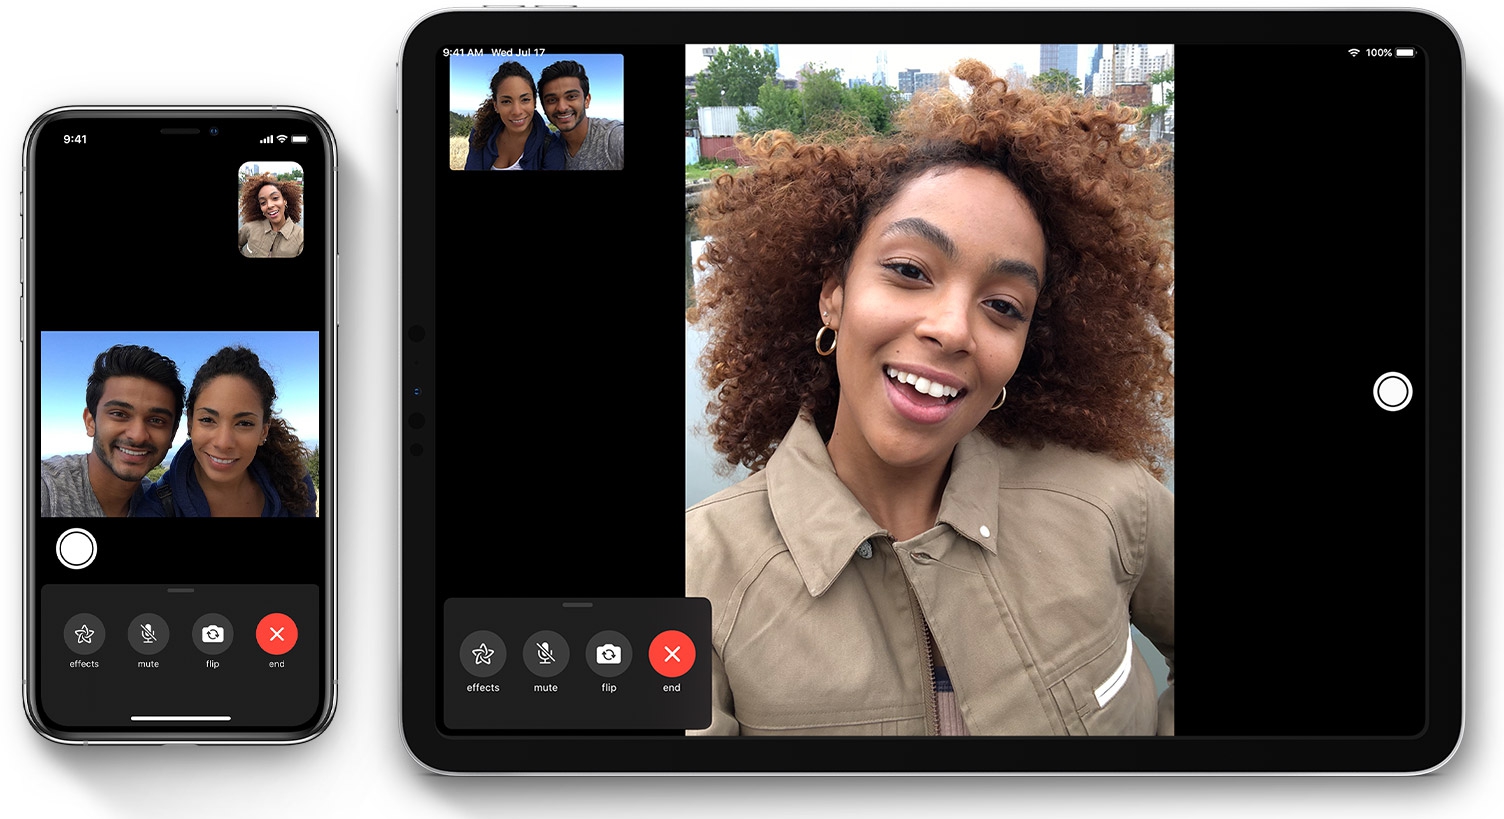 FaceTime Not Working on iPhone or iPad? Here’s How to Fix & Troubleshoot